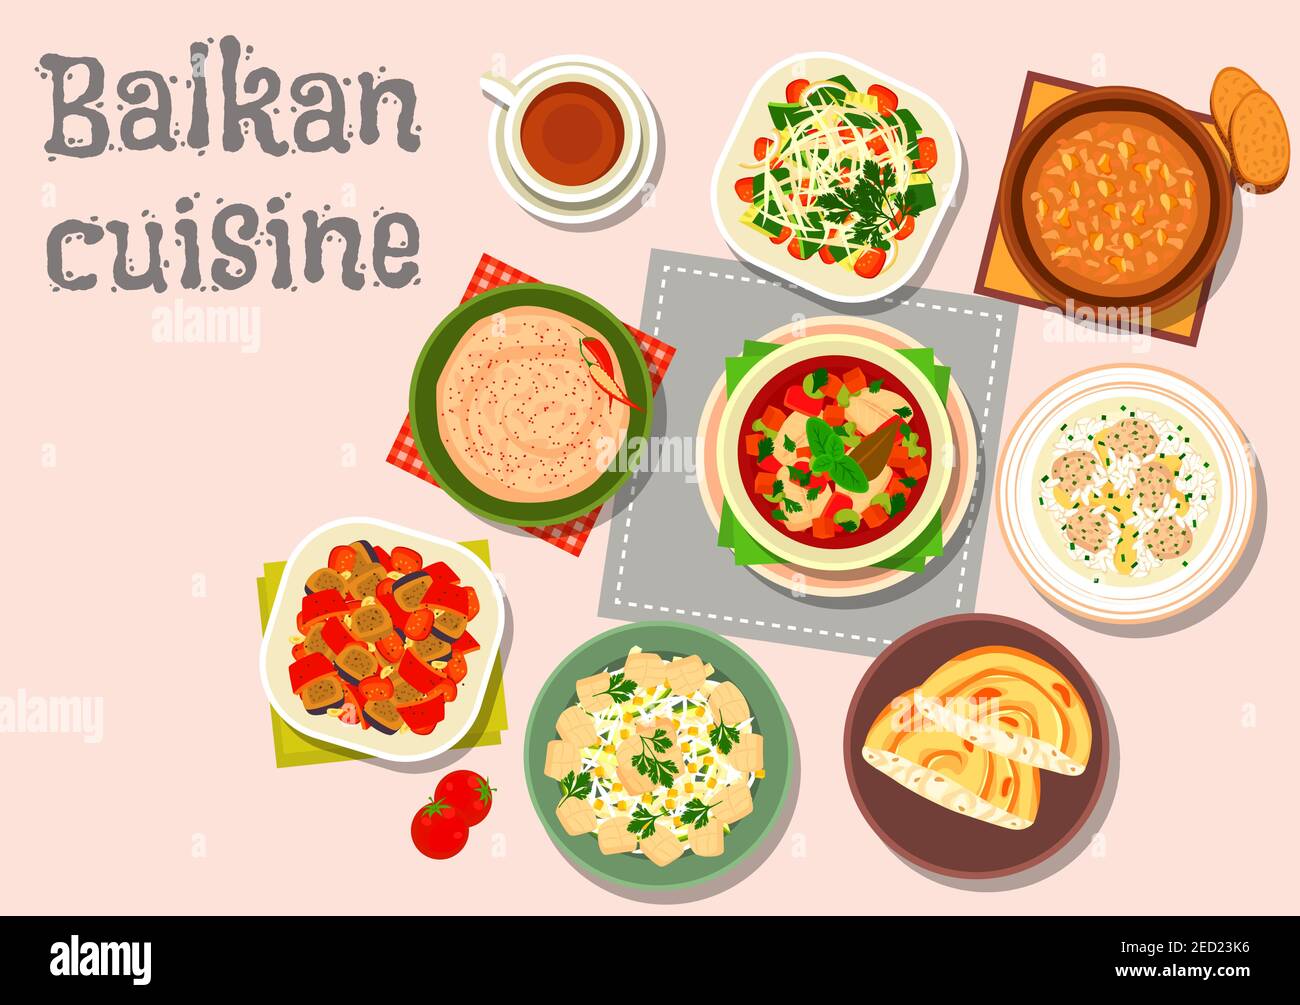 Balkan cuisine dinner icon with paprika cheese spread, garlic nut sauce, baked vegetable salad, meatball rice soup, fish soup, vegetable salad, fish e Stock Vector